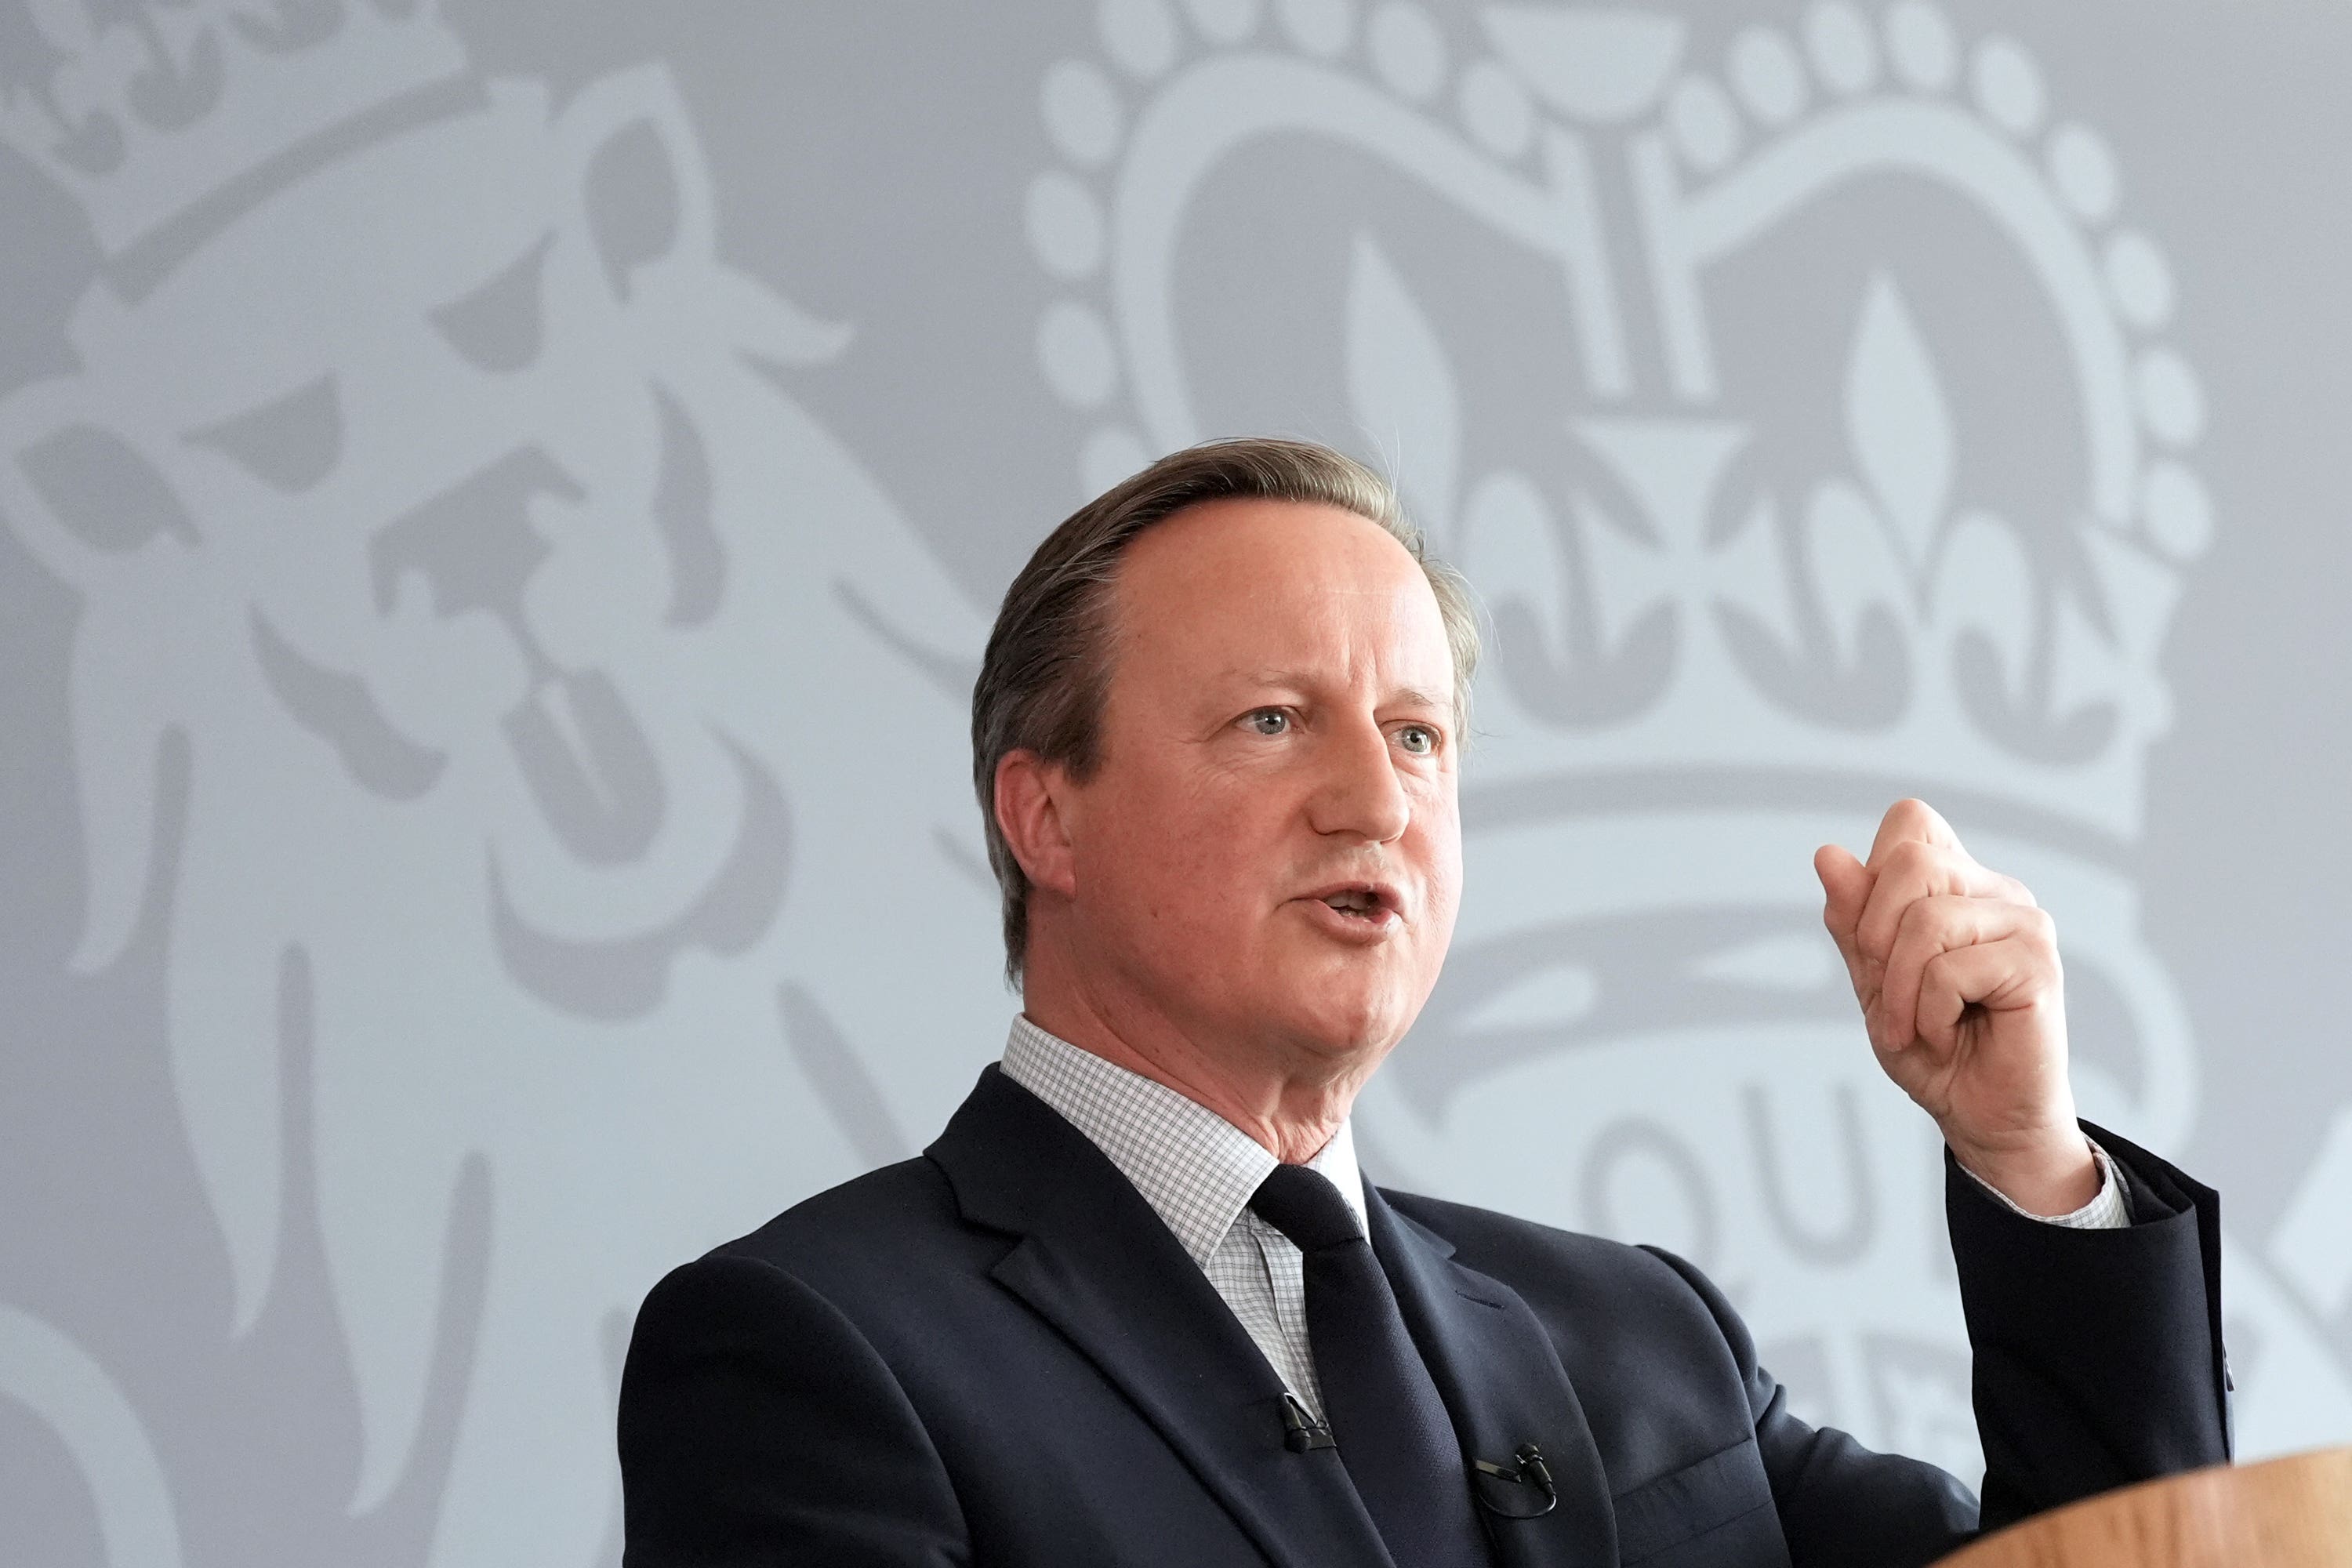 Foreign secretary and former PM David Cameron said voters should give the Tories more time